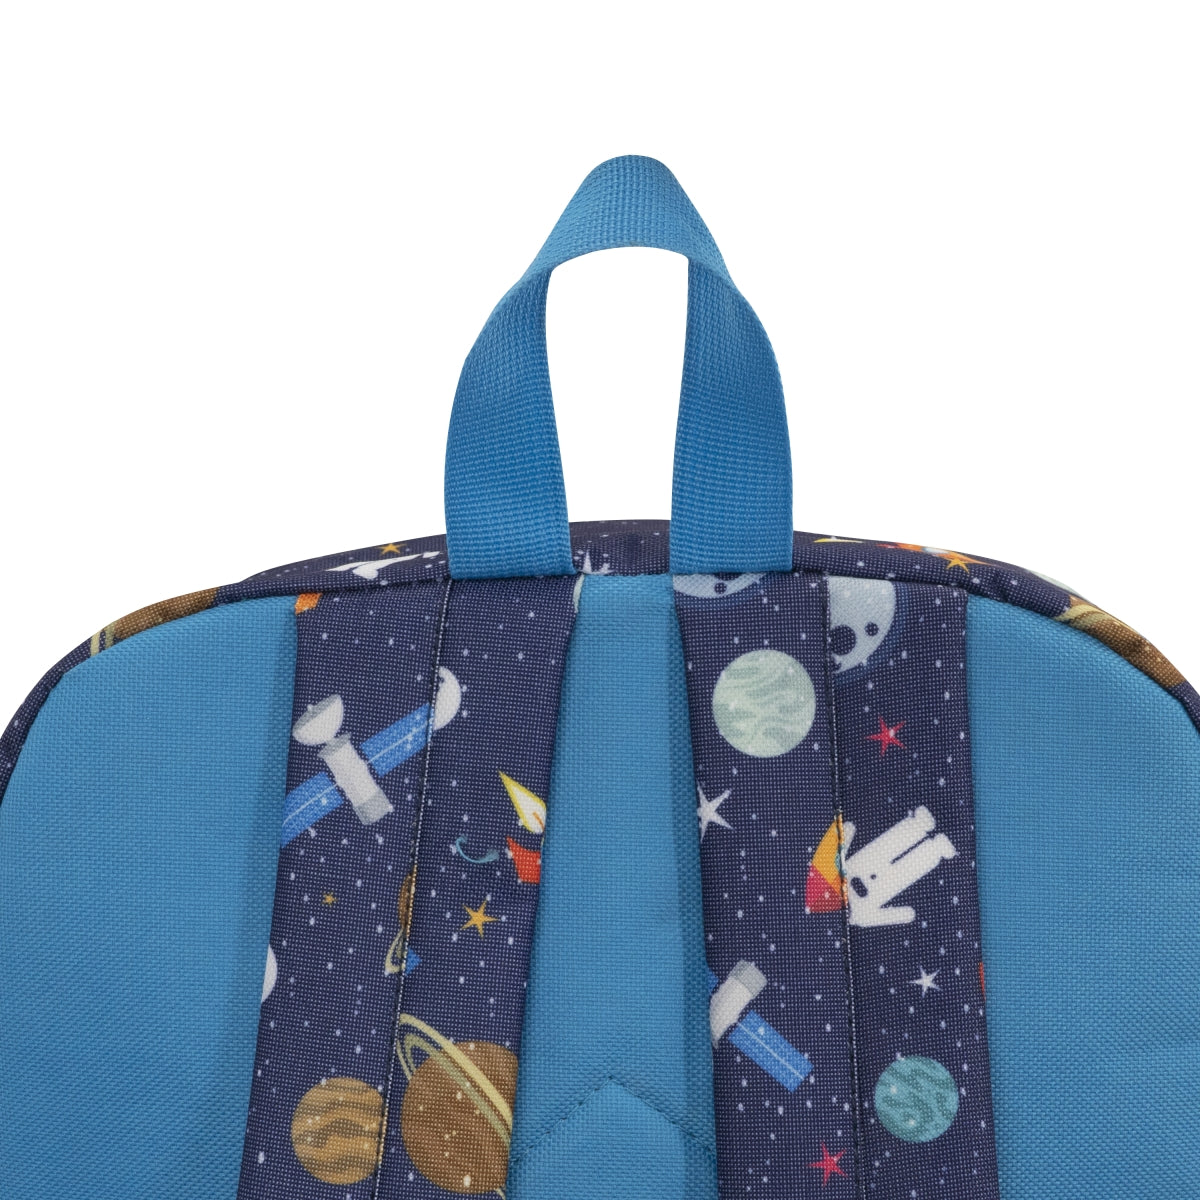 Quest Space 4 Piece BTS Backpack Combo - Navy